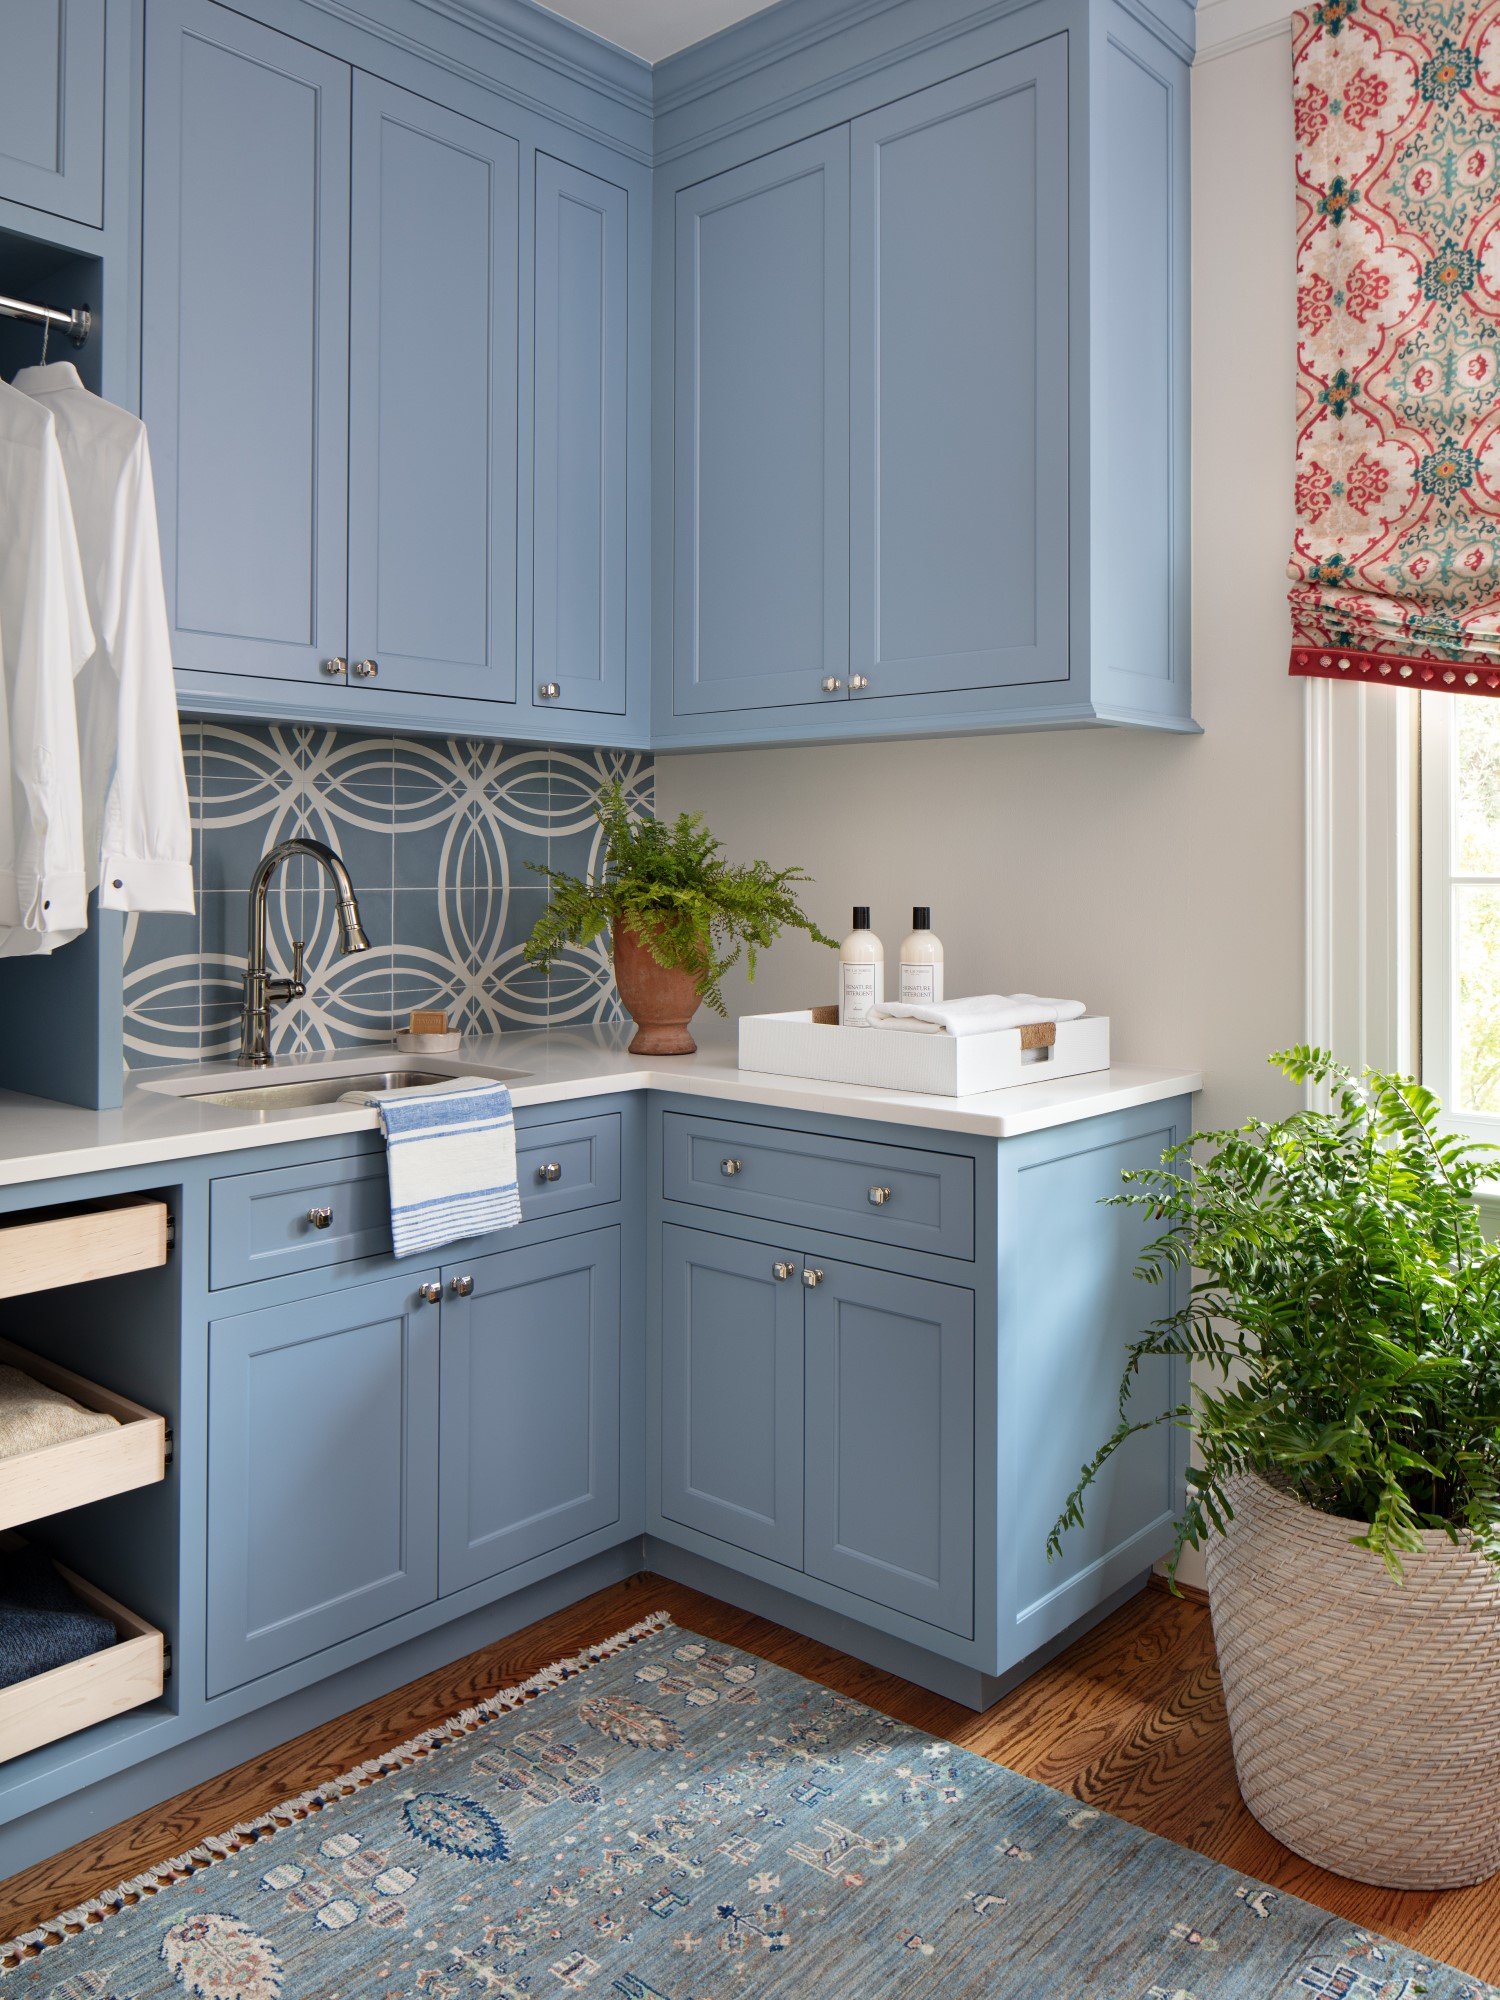  Proving that functional rooms can have sophisticated style is this laundry room designed by Susan Jamieson with robin's egg blue cabinets and a dynamic tile backsplash 